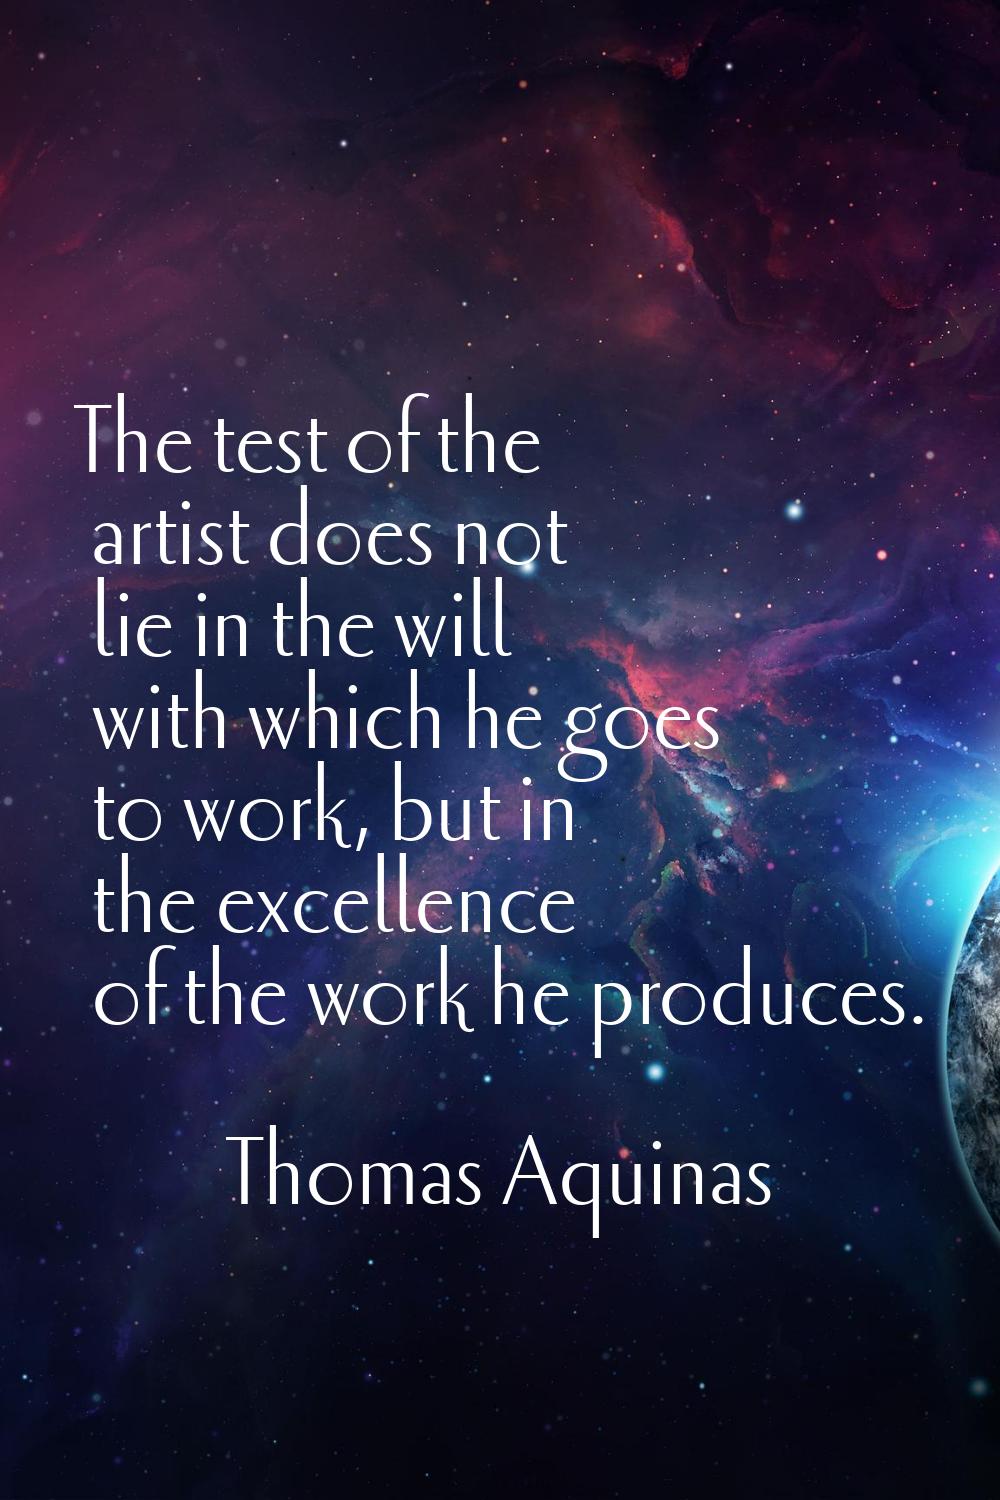 The test of the artist does not lie in the will with which he goes to work, but in the excellence o